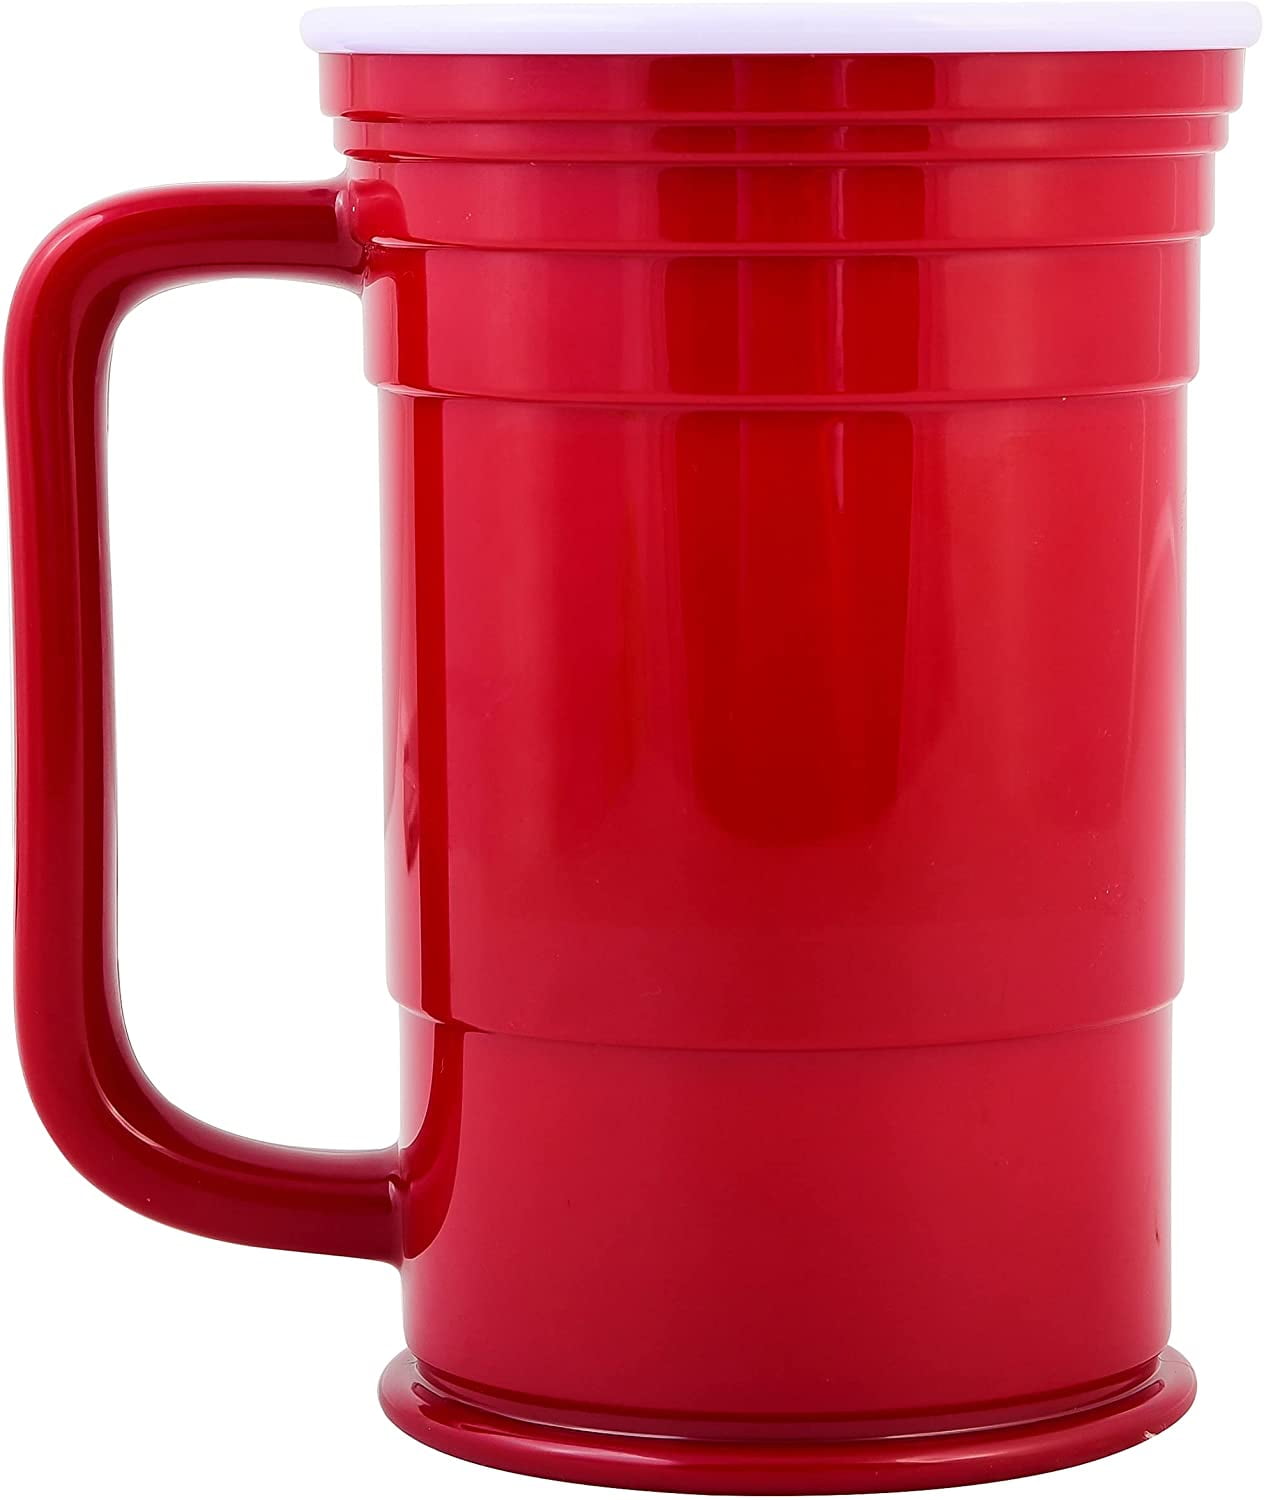 Red Cup Living Reusable Plastic Coffee Mug and Beer Cup